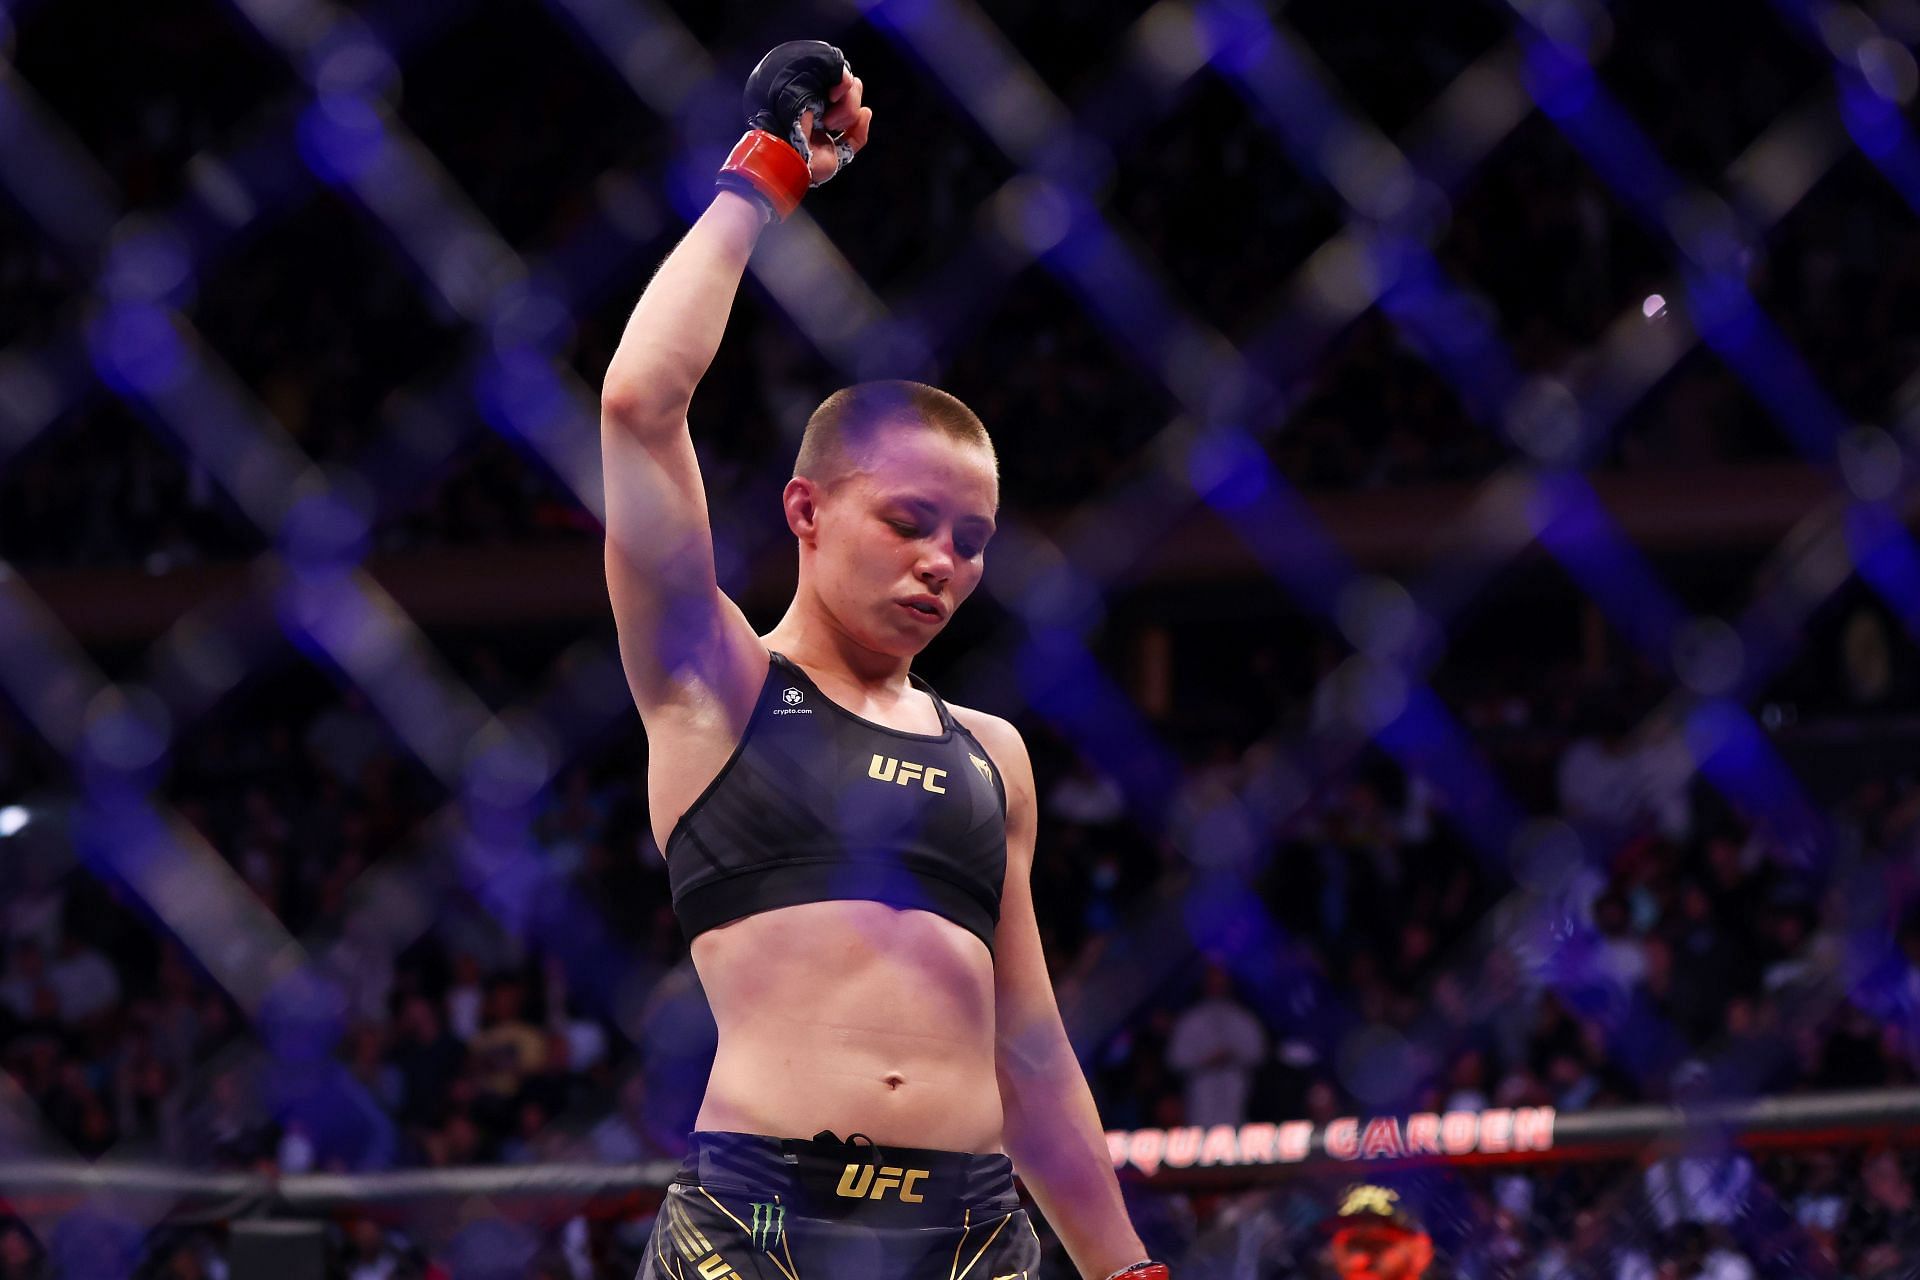 Rose Namajunas will now look to win the strawweight title for a third time